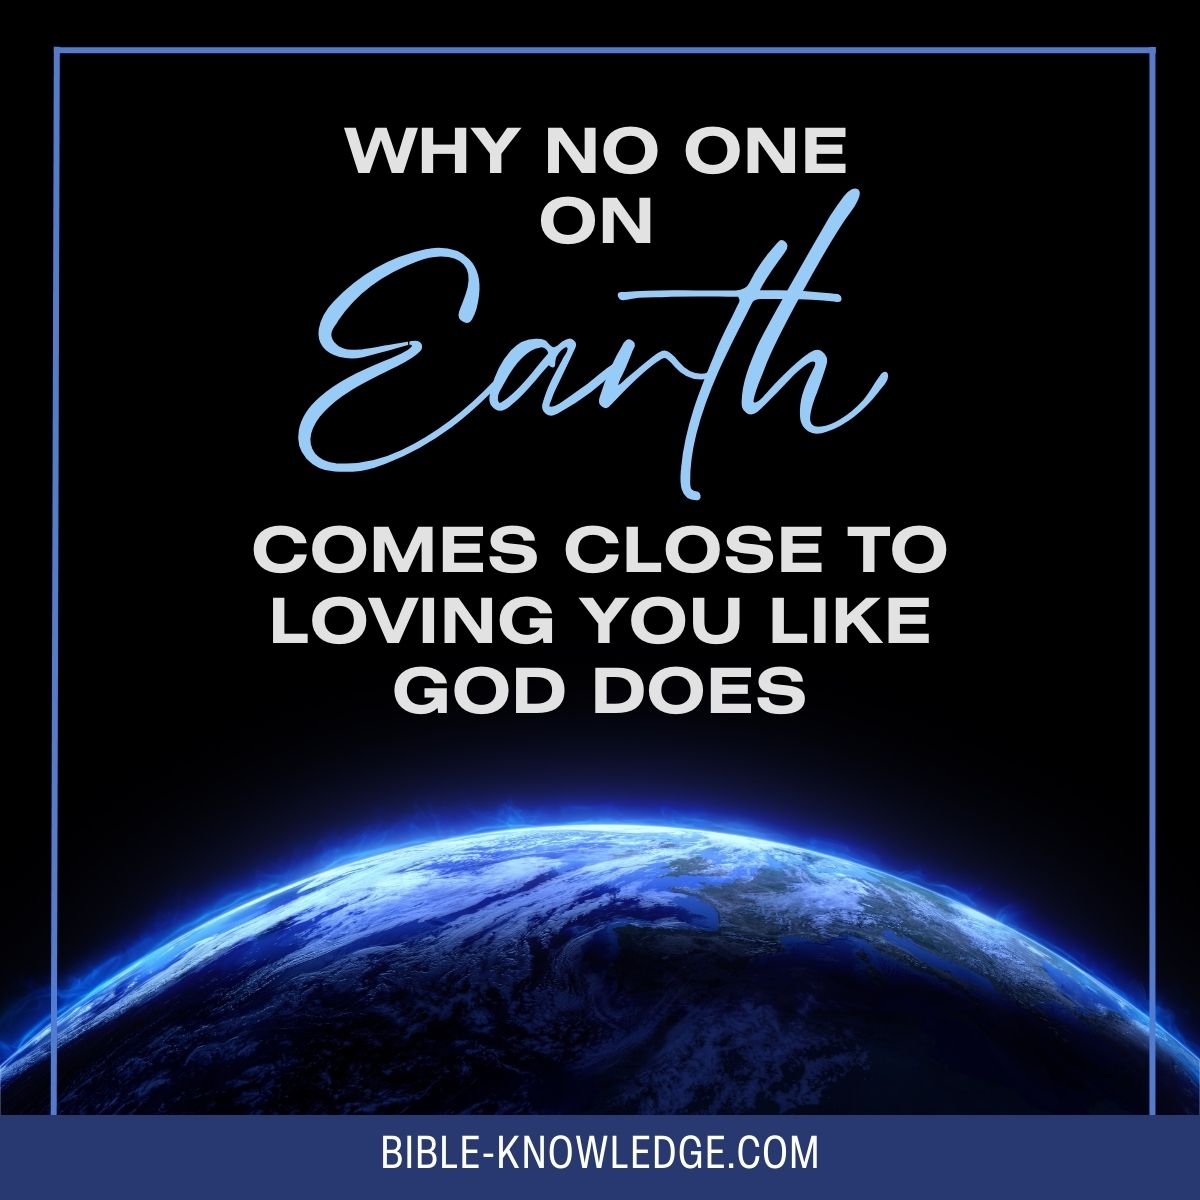 Why No One on Earth Comes Close to Loving You Like God Does